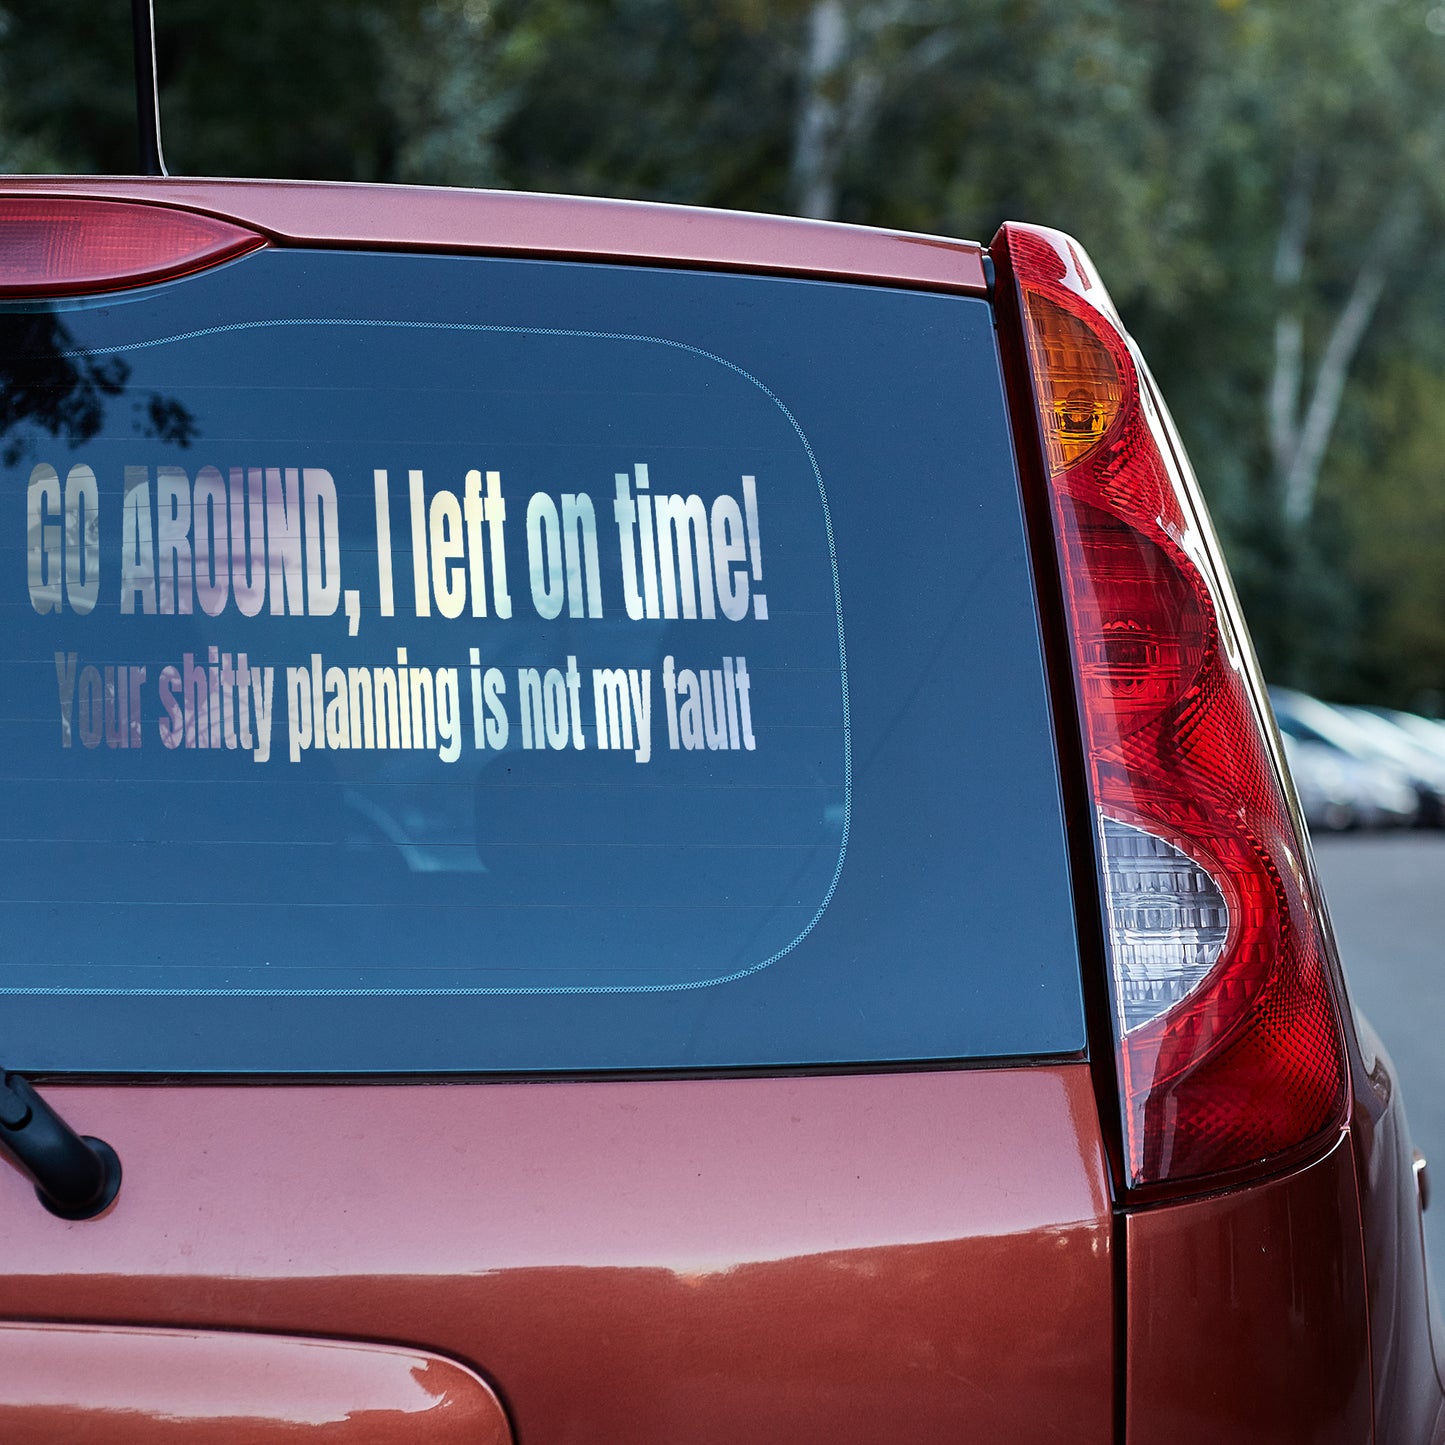 Go around I left on time vinyl decal car decal decal for cars decal for trucks Decals for cars Decals for Trucks decals for tumblers decals for vehicles door decal funny decals tailgater Window decals